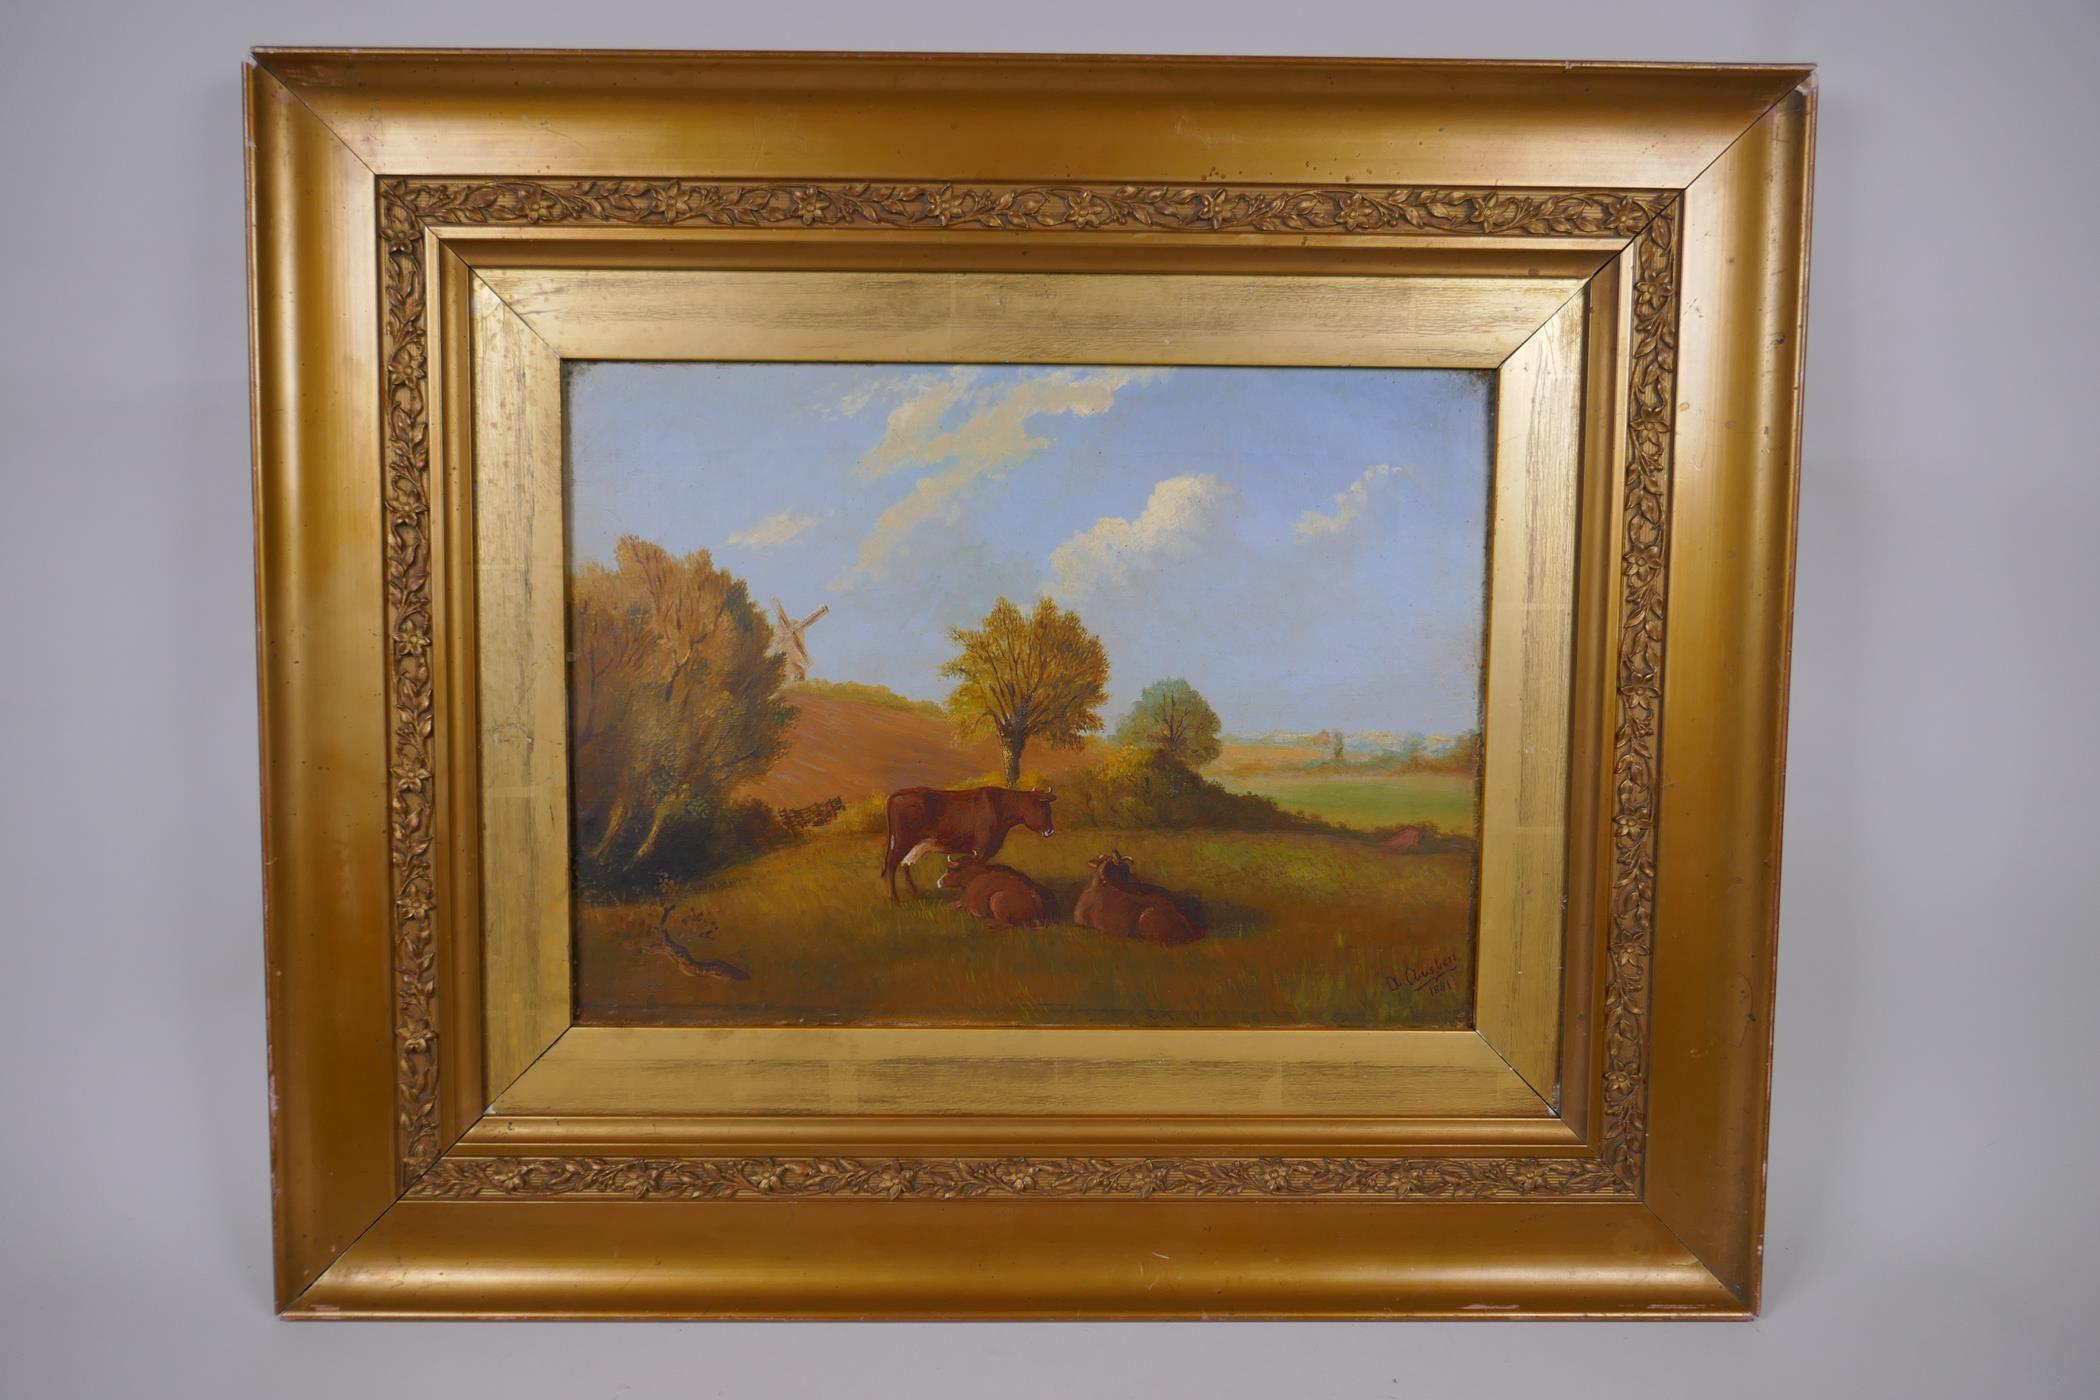 Landscape with cattle resting, signed A. Austin, 1881, C19th oil on canvas, 27 x 37cm - Image 2 of 4